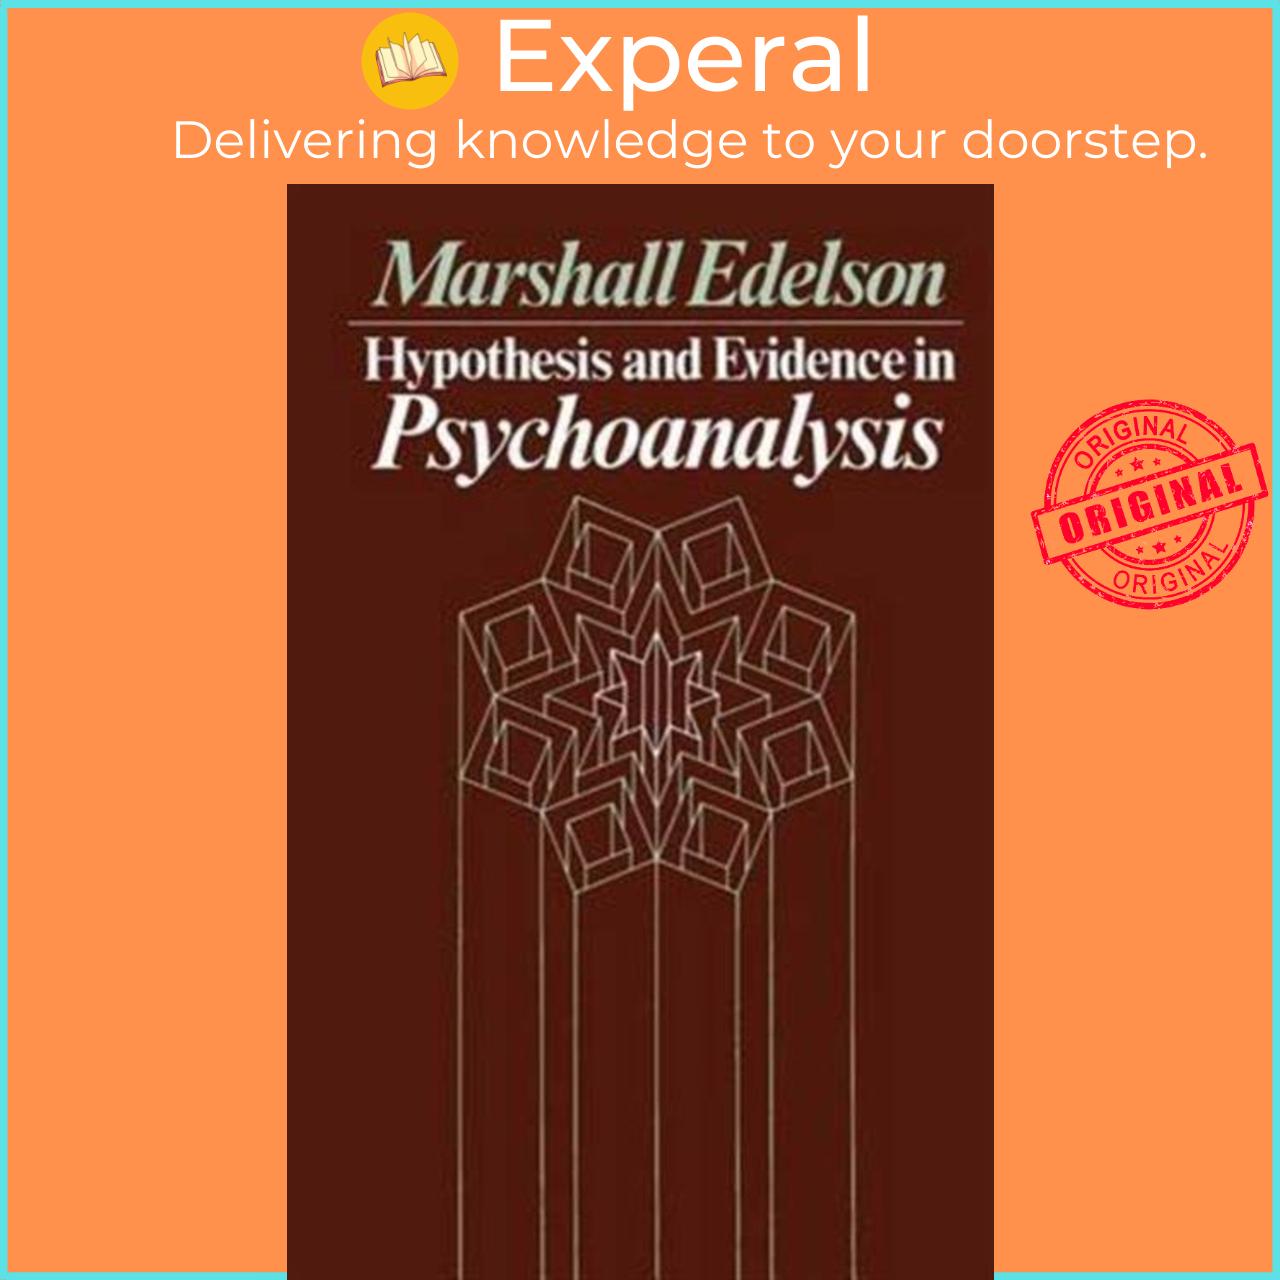 Sách - Hypothesis and Evidence in Psychoanalysis by Marshall Edelson (UK edition, paperback)